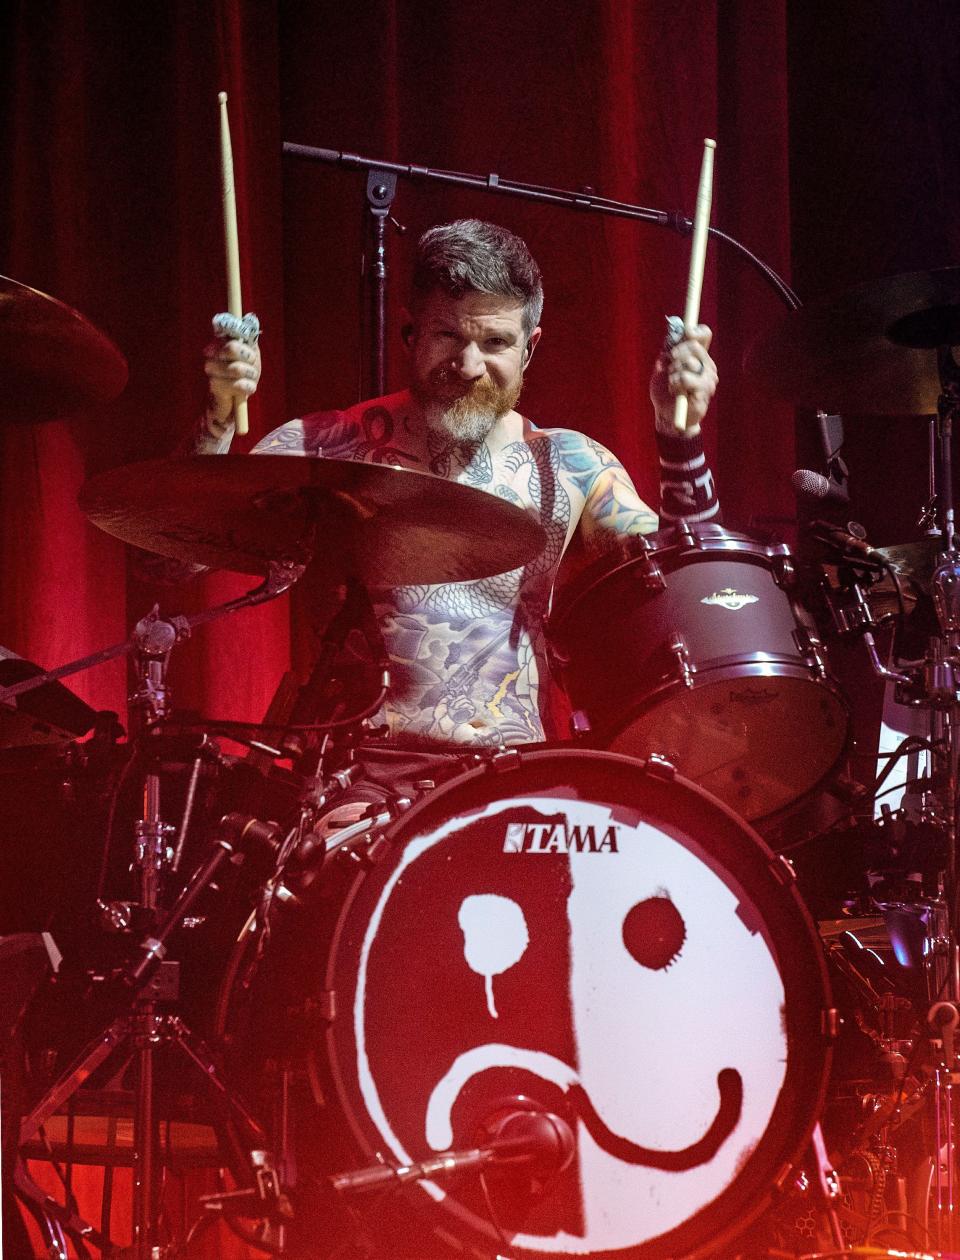 Andy Hurley on drums for Fall Out Boy.